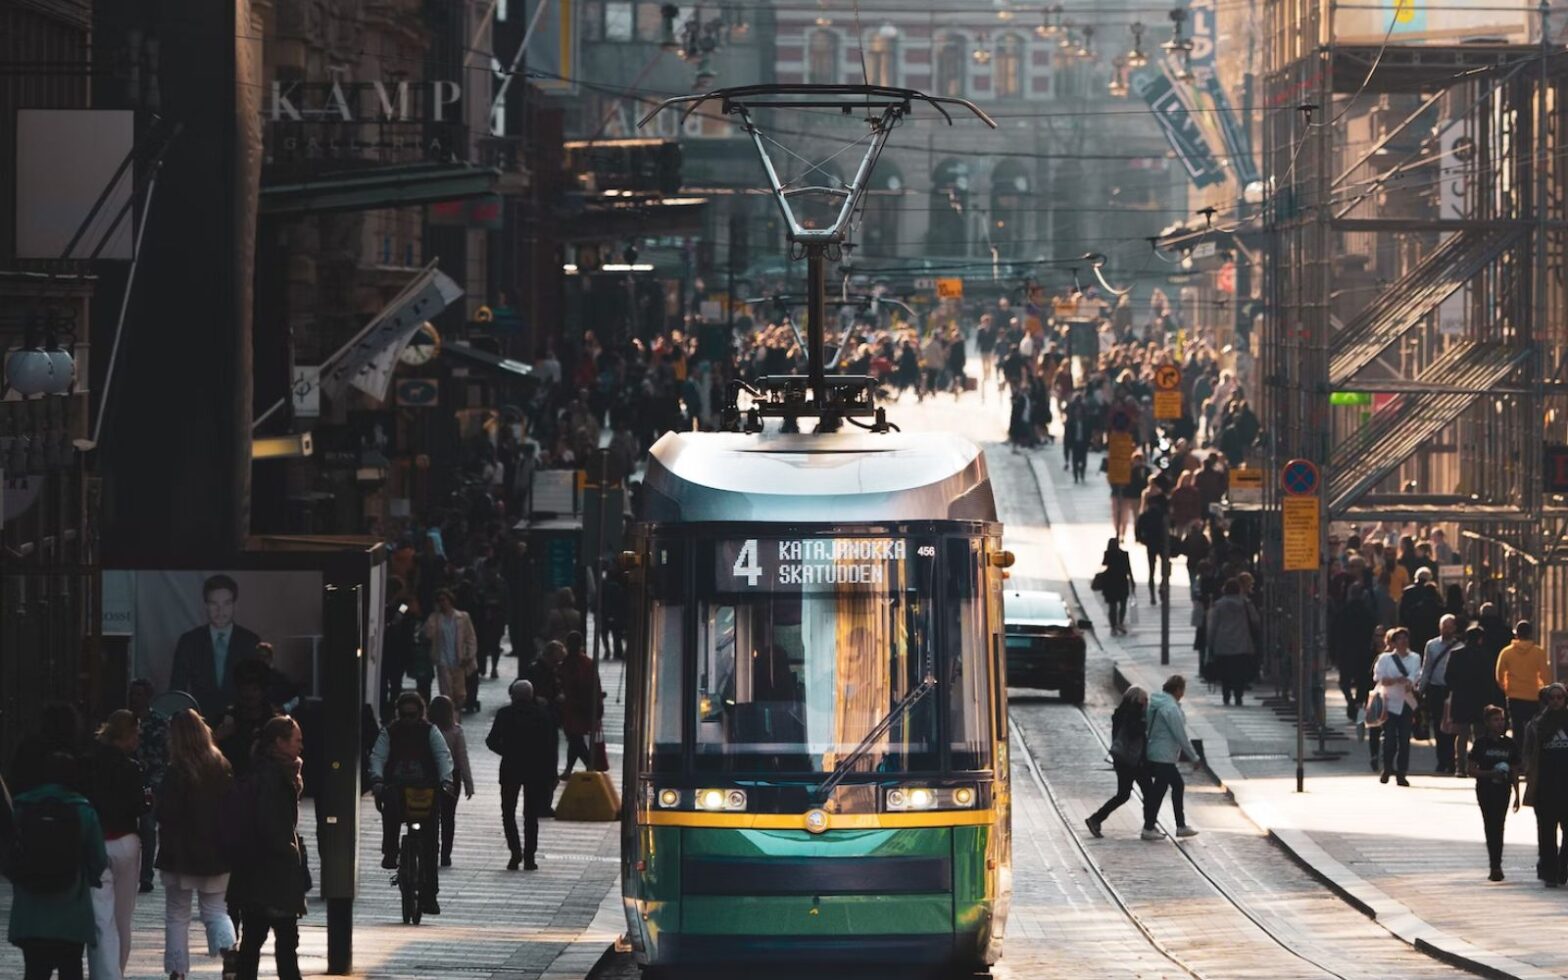 The World’s Happiest Countries in 2023 - image of street view in Helsinki, Finland with trolley on street and people walking throughout the city